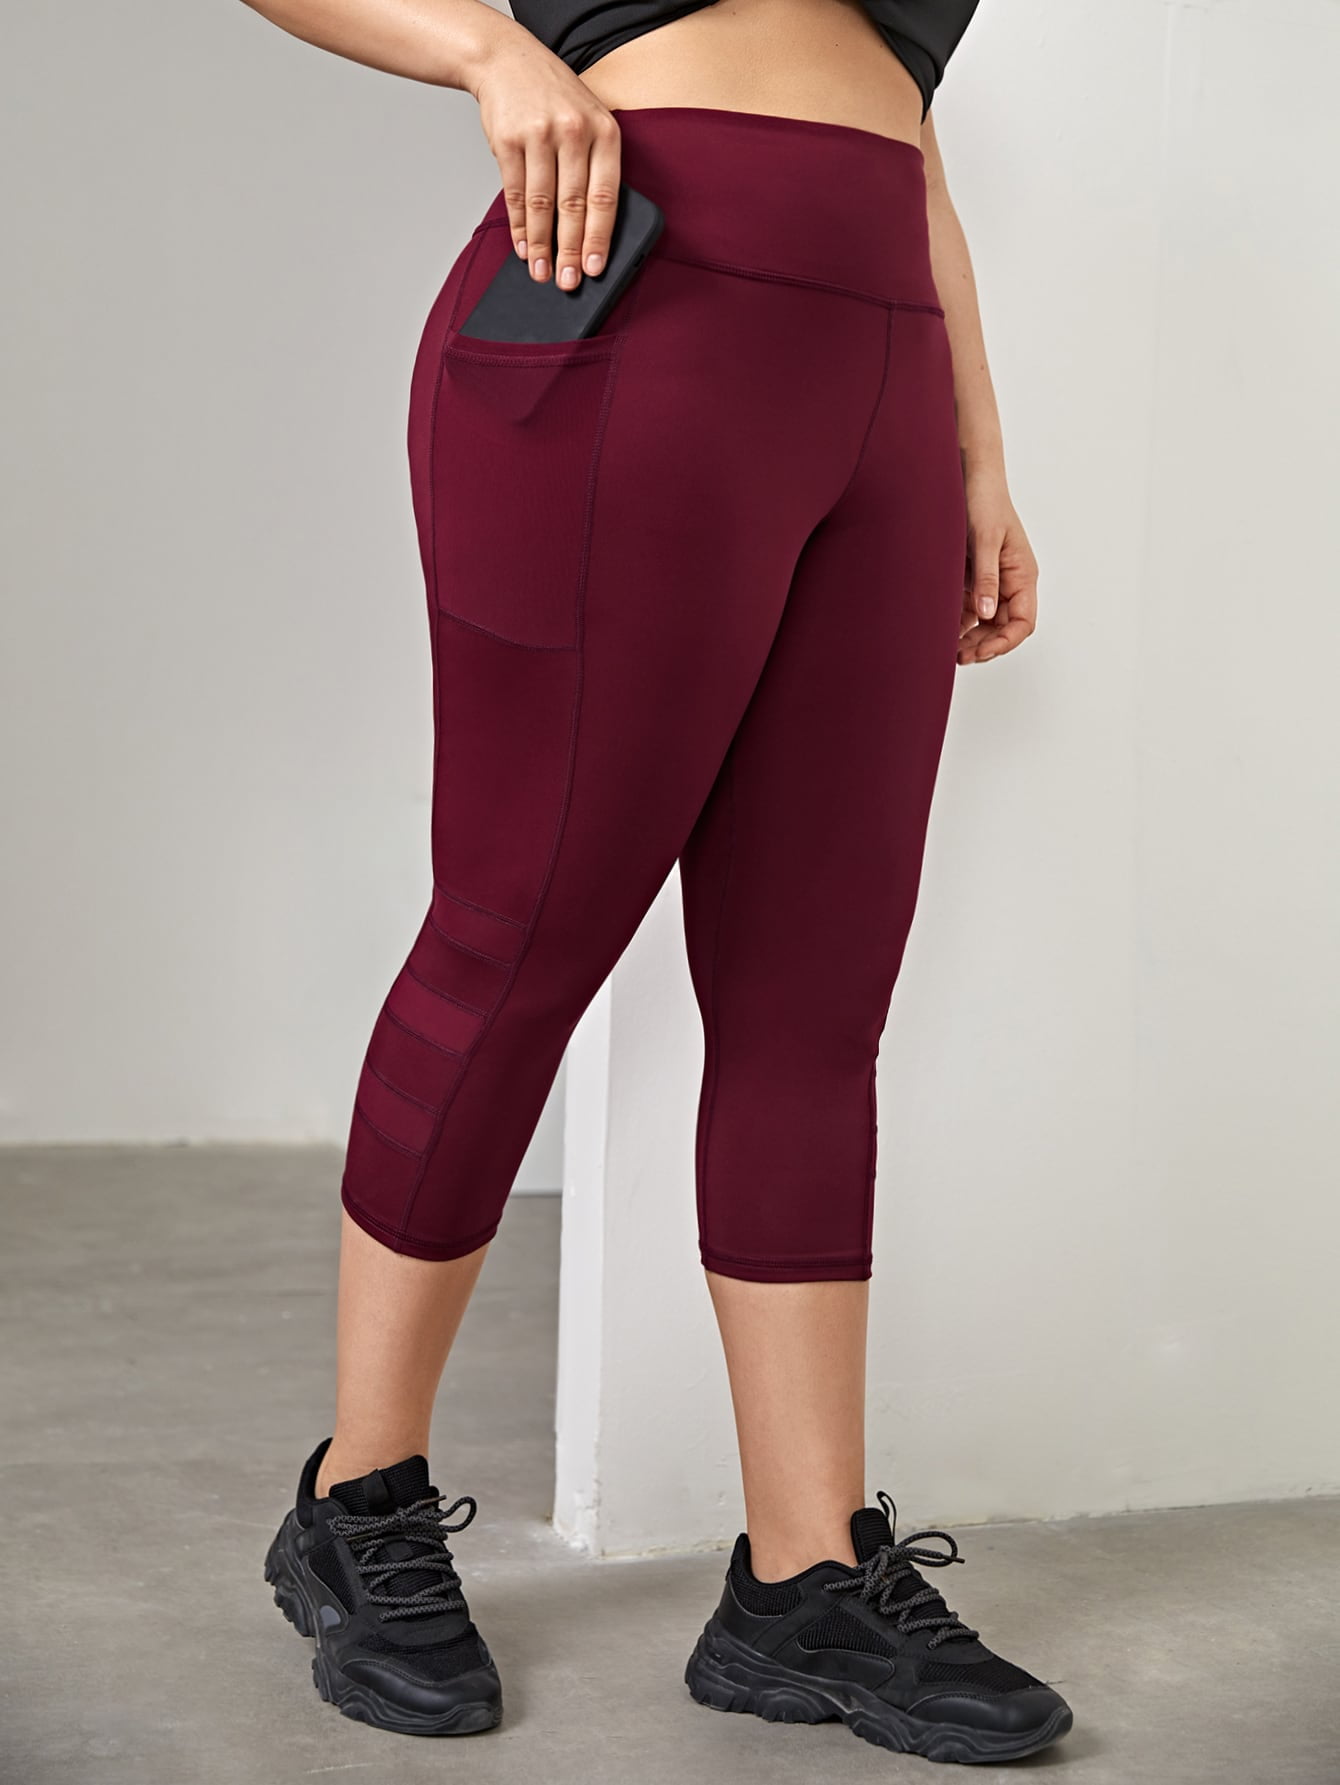 women's sports leggings with phone pocket guide